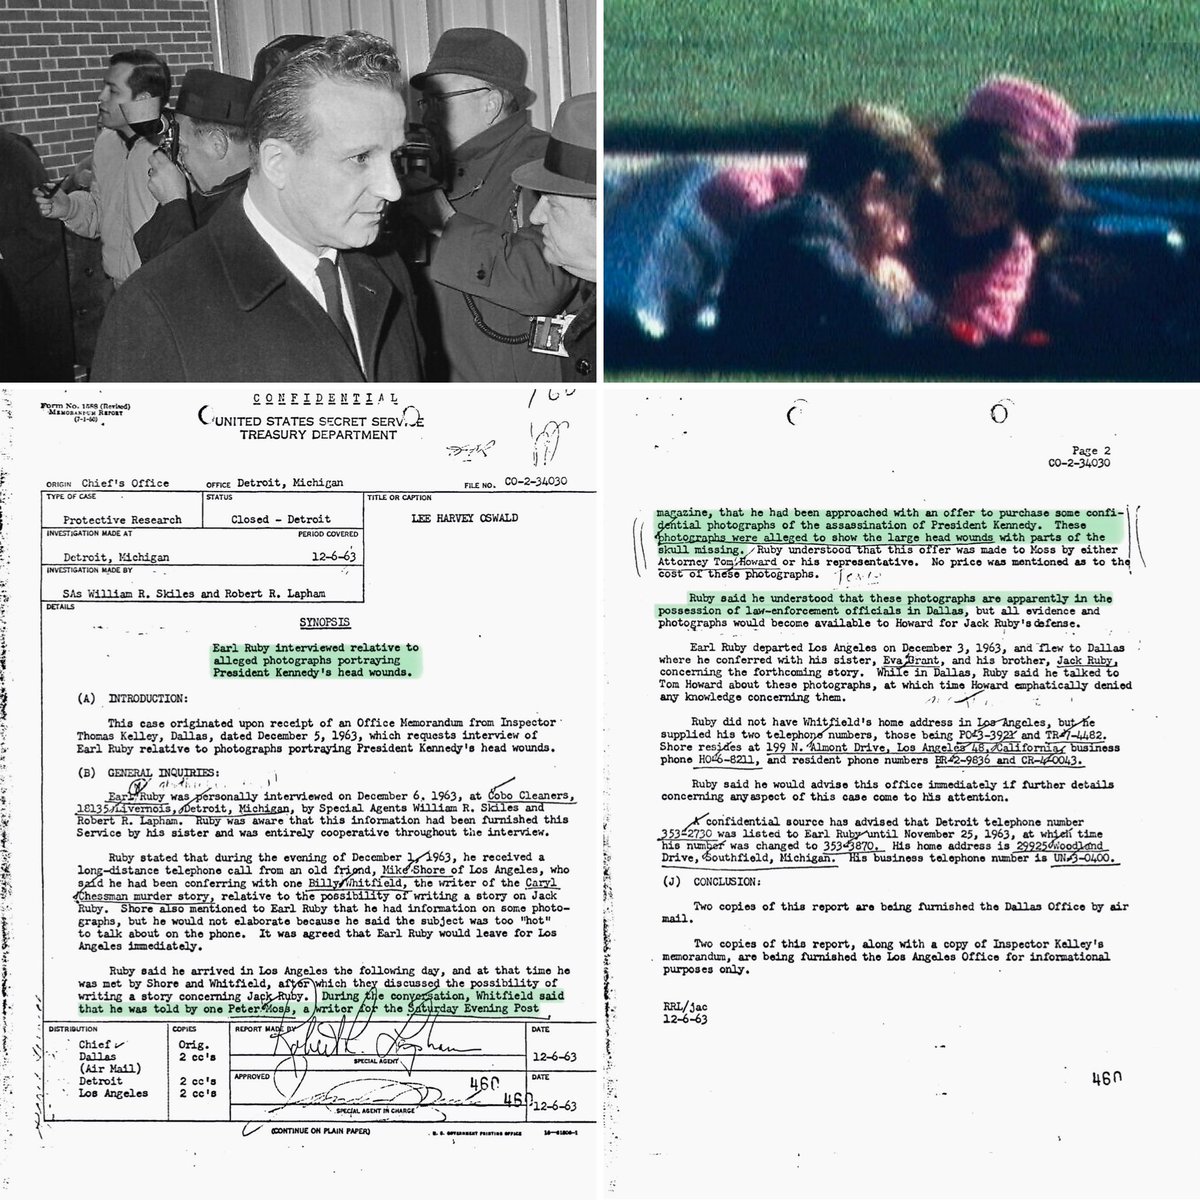 Were photos of the head wounds taken in Dallas suppressed? In early December 1963, Jack Ruby's brother, Earl Ruby, receives information that '𝙥𝙝𝙤𝙩𝙤𝙜𝙧𝙖𝙥𝙝𝙨 𝙝𝙖𝙙 𝙗𝙚𝙚𝙣 𝙩𝙖𝙠𝙚𝙣 𝙤𝙛 𝙋𝙧𝙚𝙨𝙞𝙙𝙚𝙣𝙩 𝙆𝙚𝙣𝙣𝙚𝙙𝙮 𝙖𝙨 𝙝𝙚 𝙬𝙖𝙨 𝙗𝙚𝙞𝙣𝙜 𝙩𝙖𝙠𝙚𝙣 𝙞𝙣𝙩𝙤